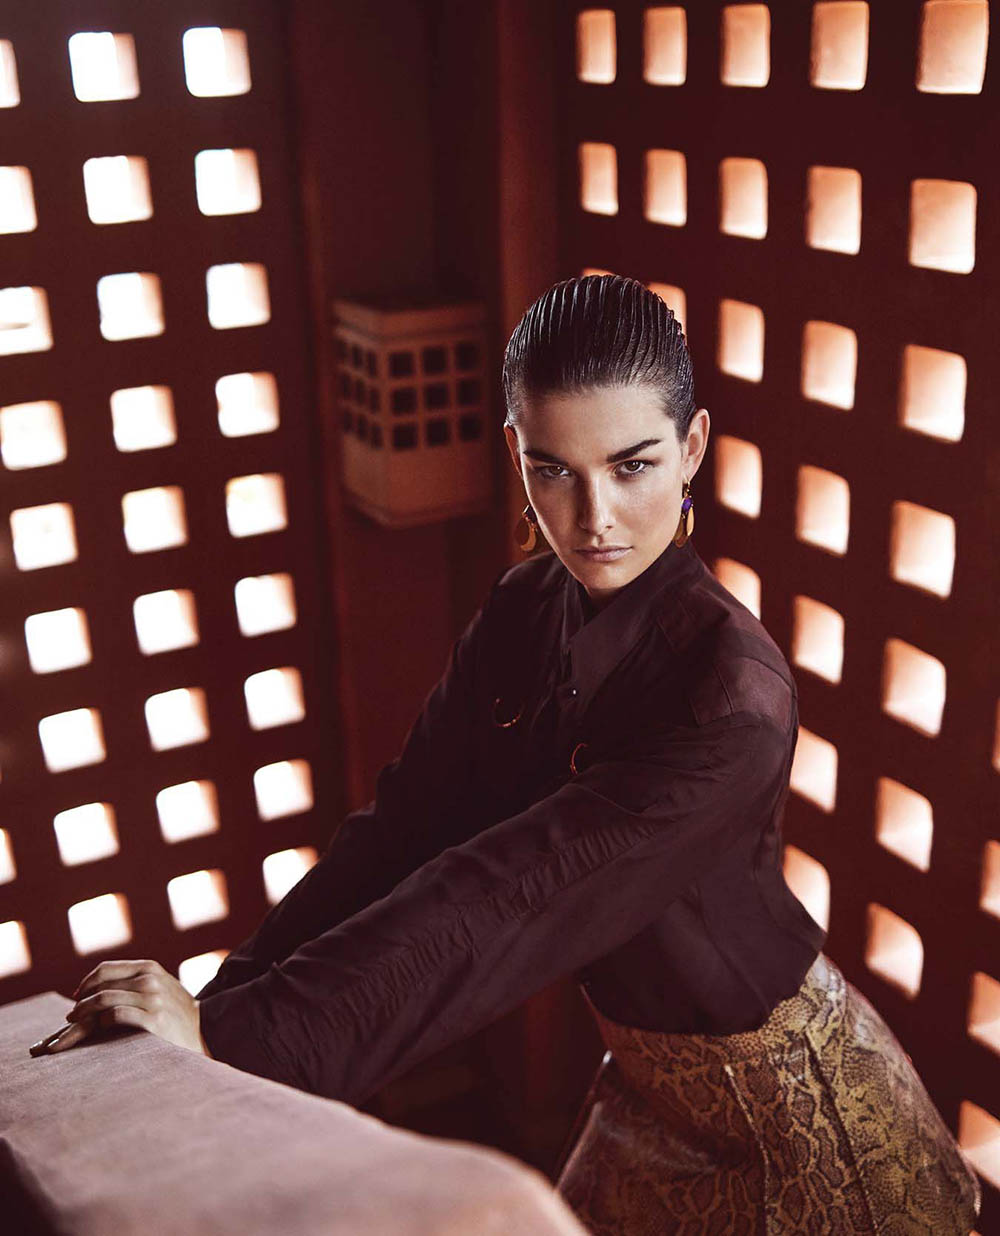 Ophelie Guillermand by Marcin Tyszka for Harper’s Bazaar US February 2018